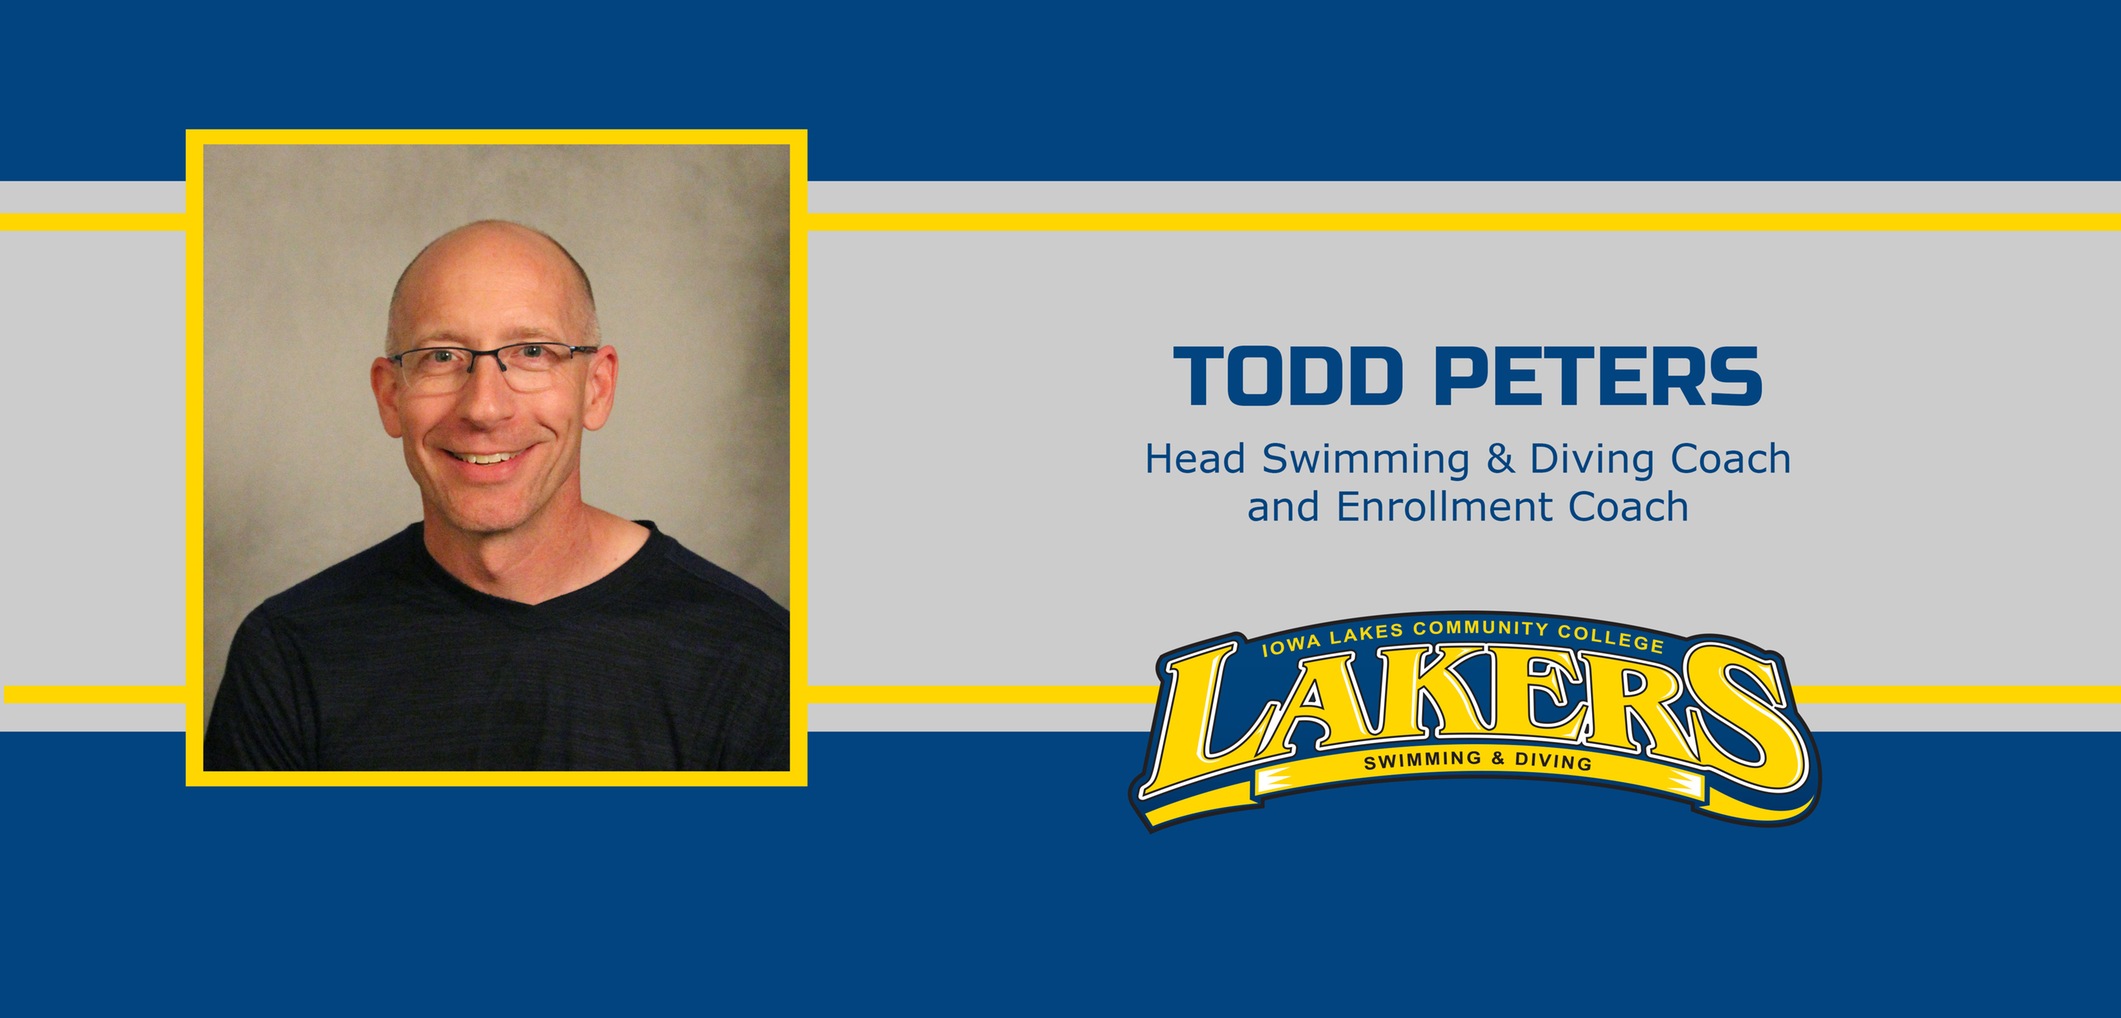 Iowa Lakes Community College Names Todd Peters as the New Head Swimming & Diving Coach